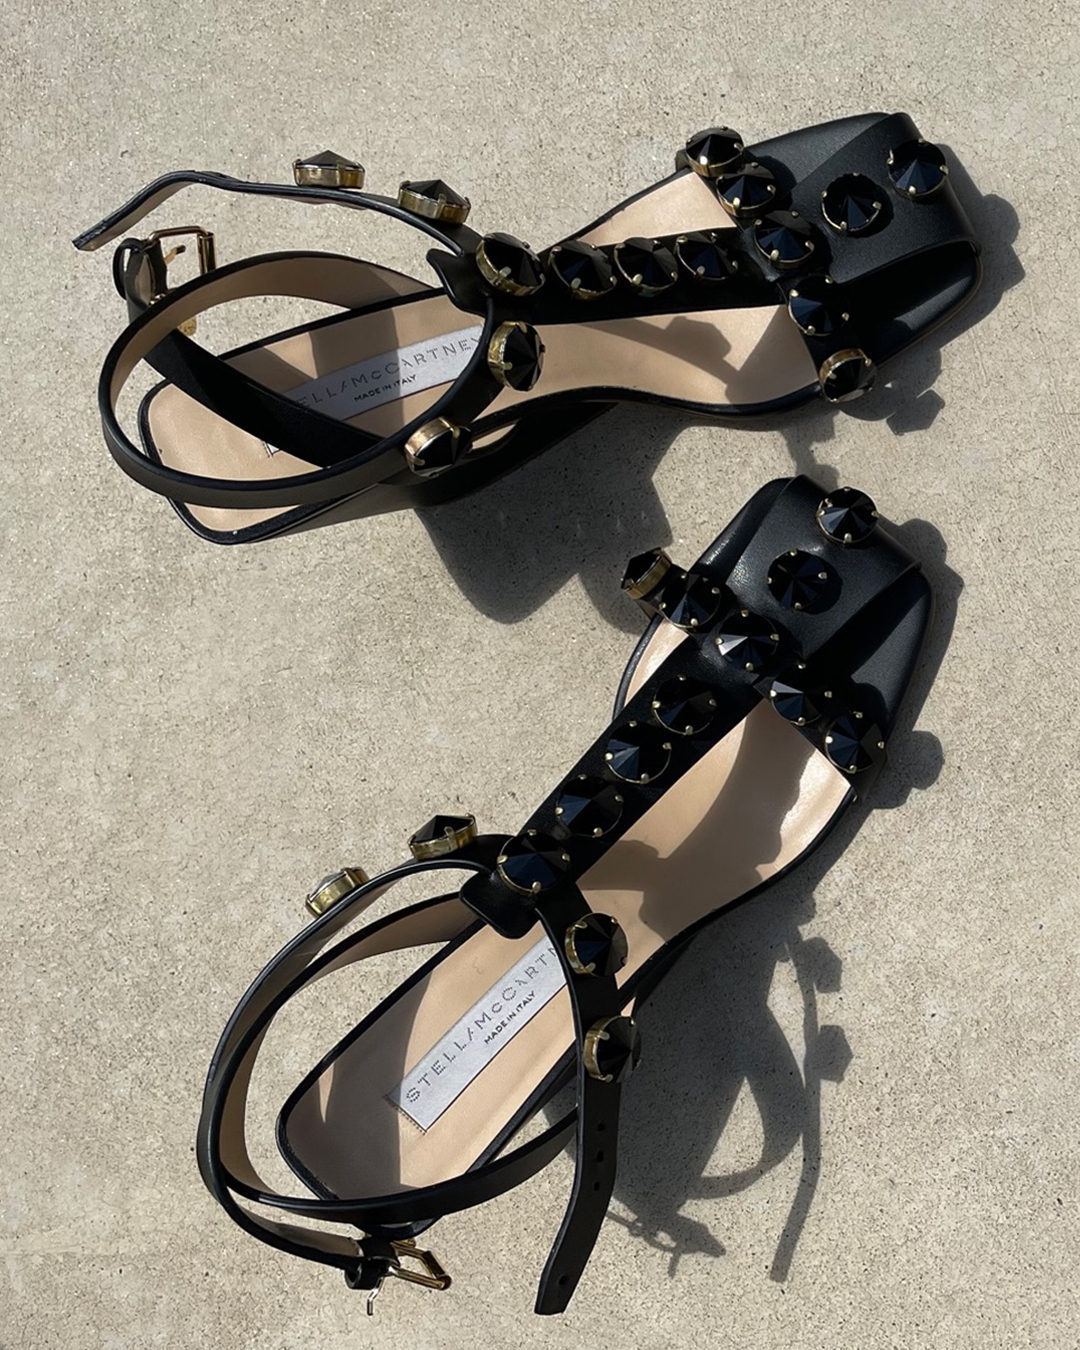 A pair of black, open-towed heels with an ankle strap and raised studded design on the straps throughout.